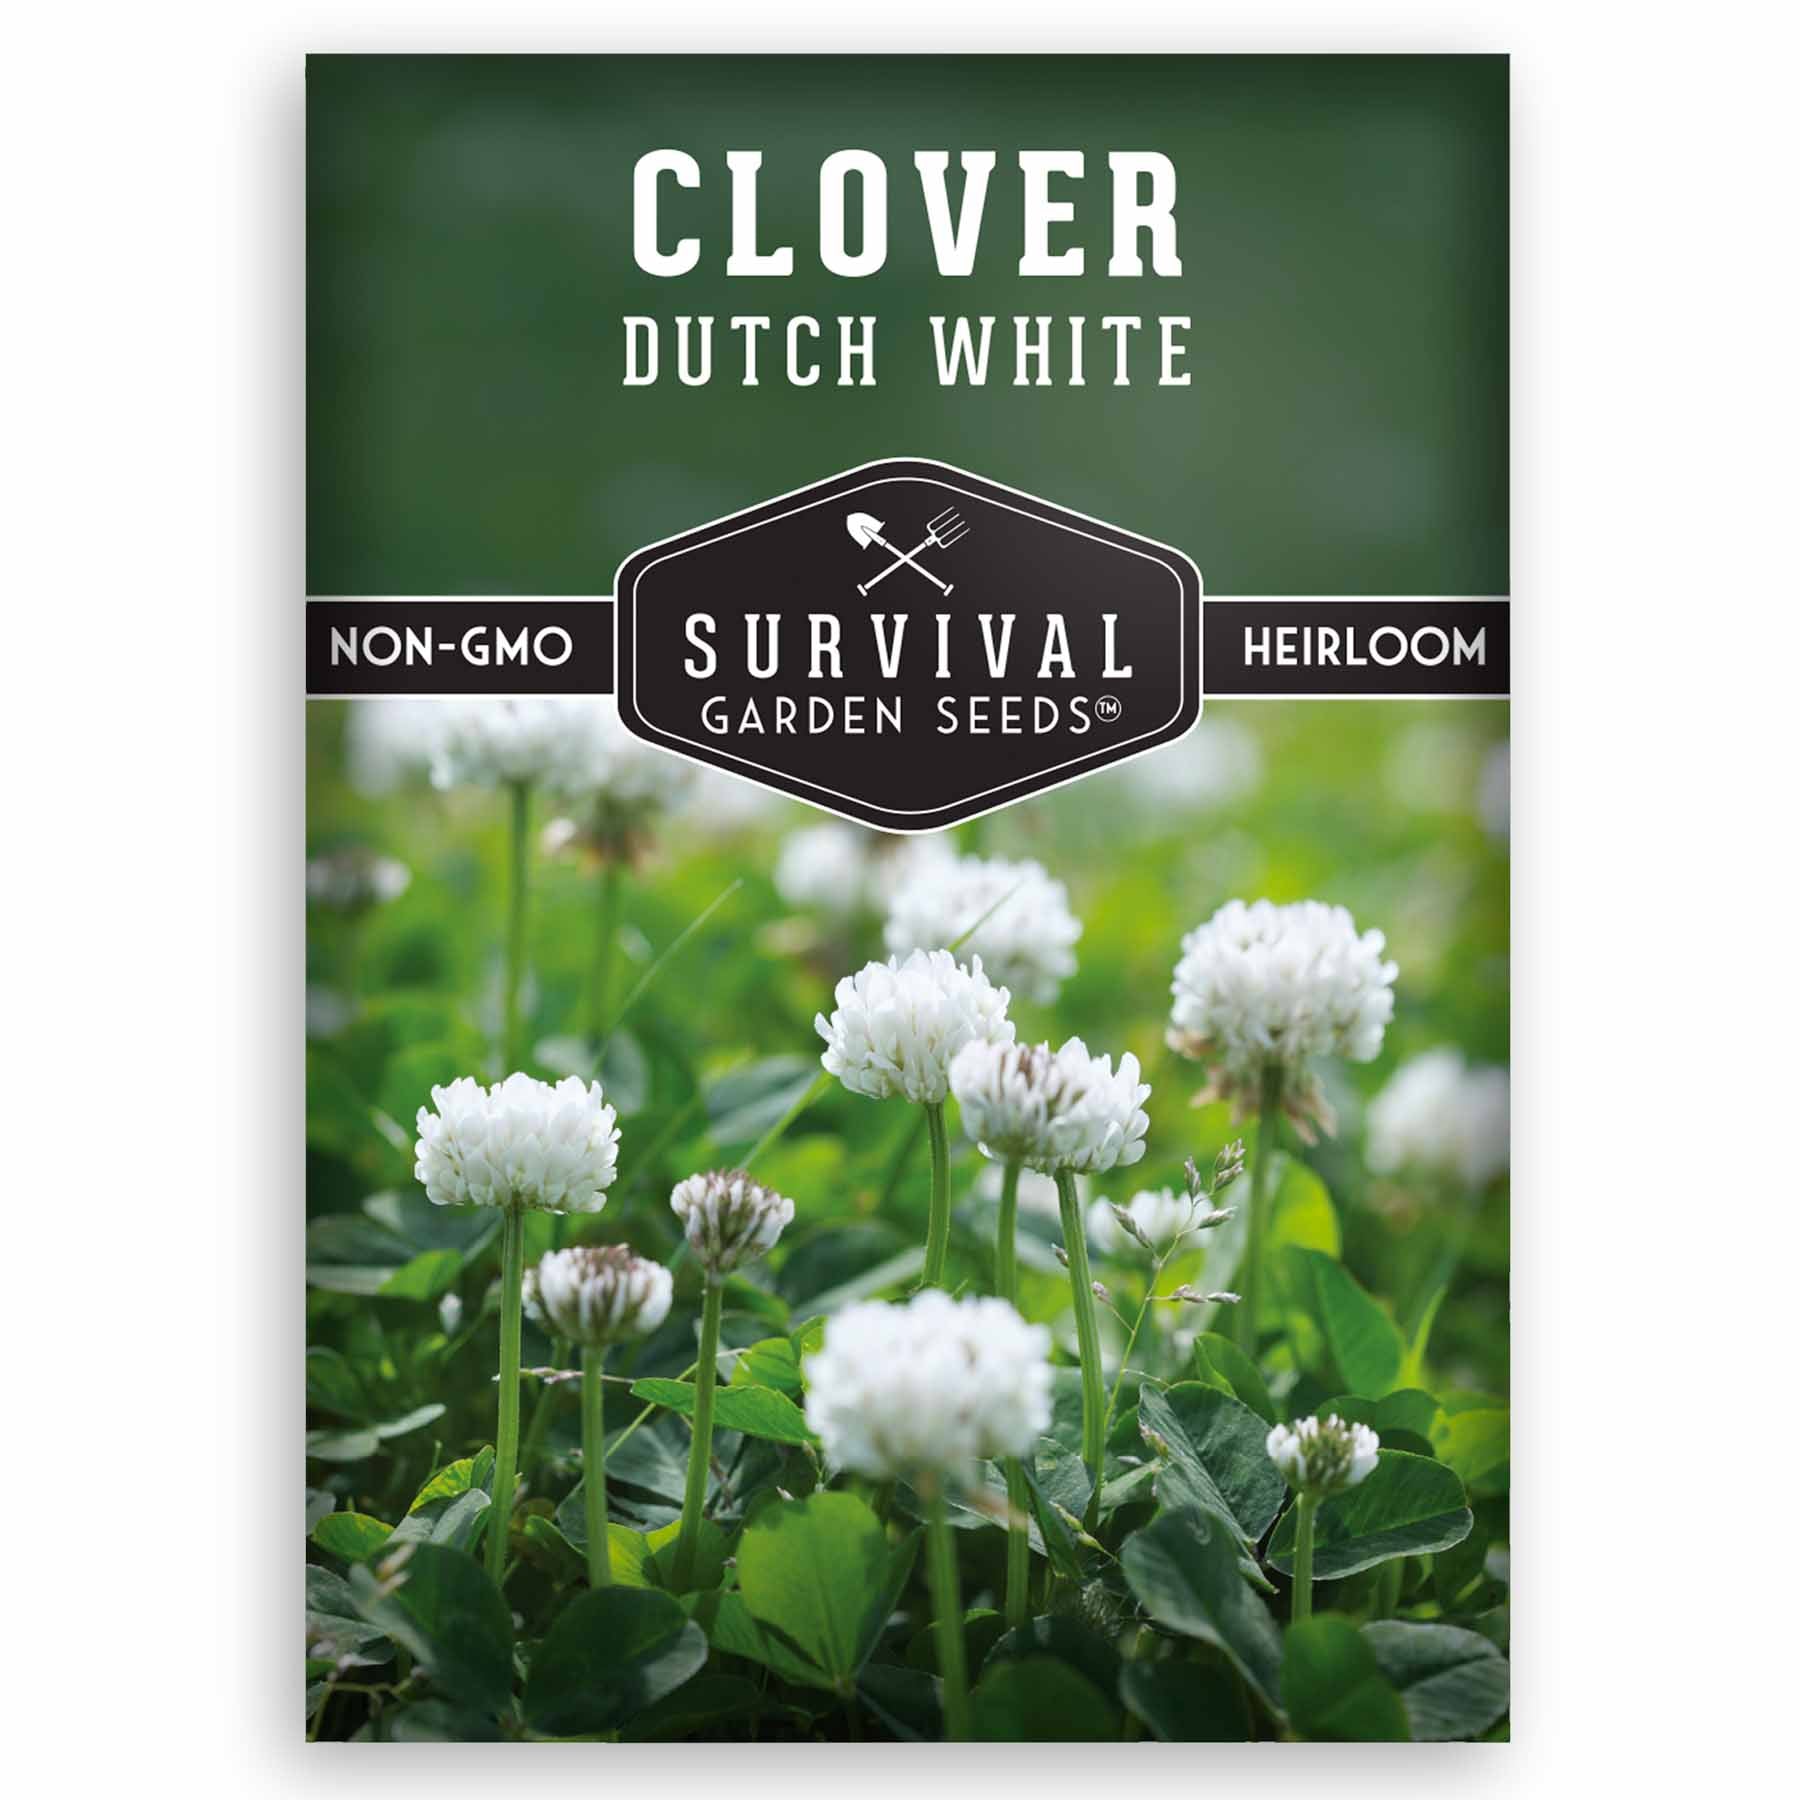 Dutch White Clover seeds for planting